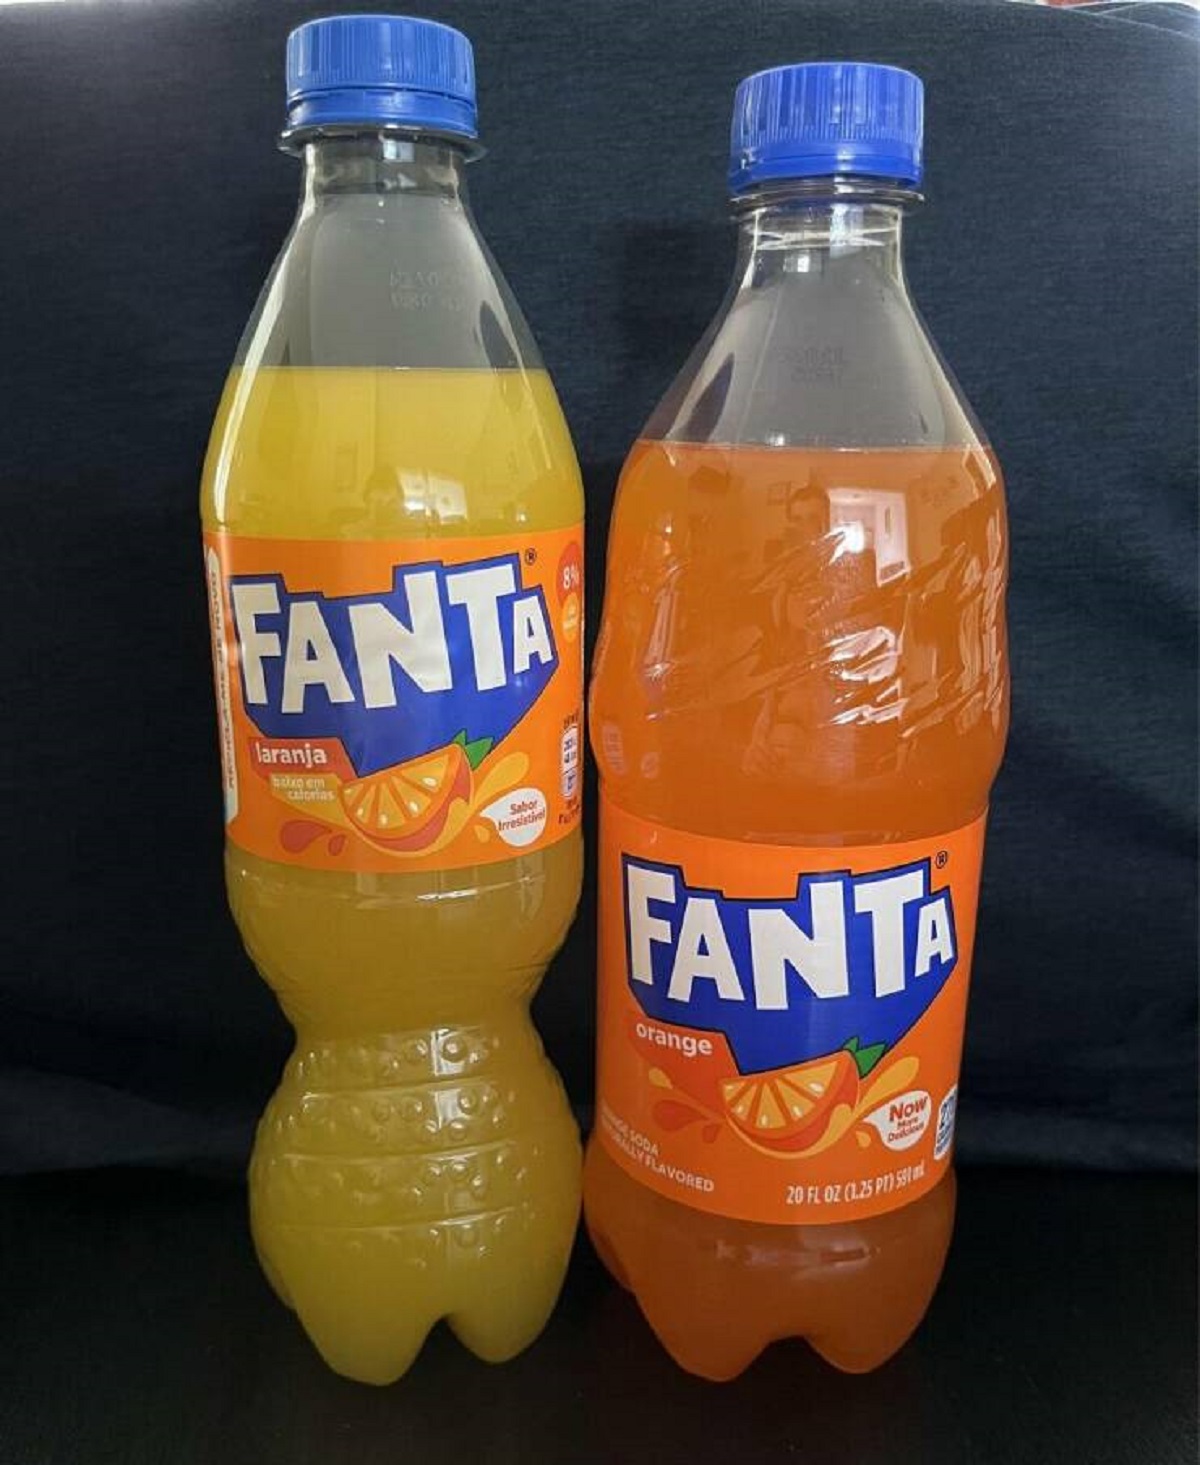 "Orange Fanta side by side Europe/Portugal left and the US right"